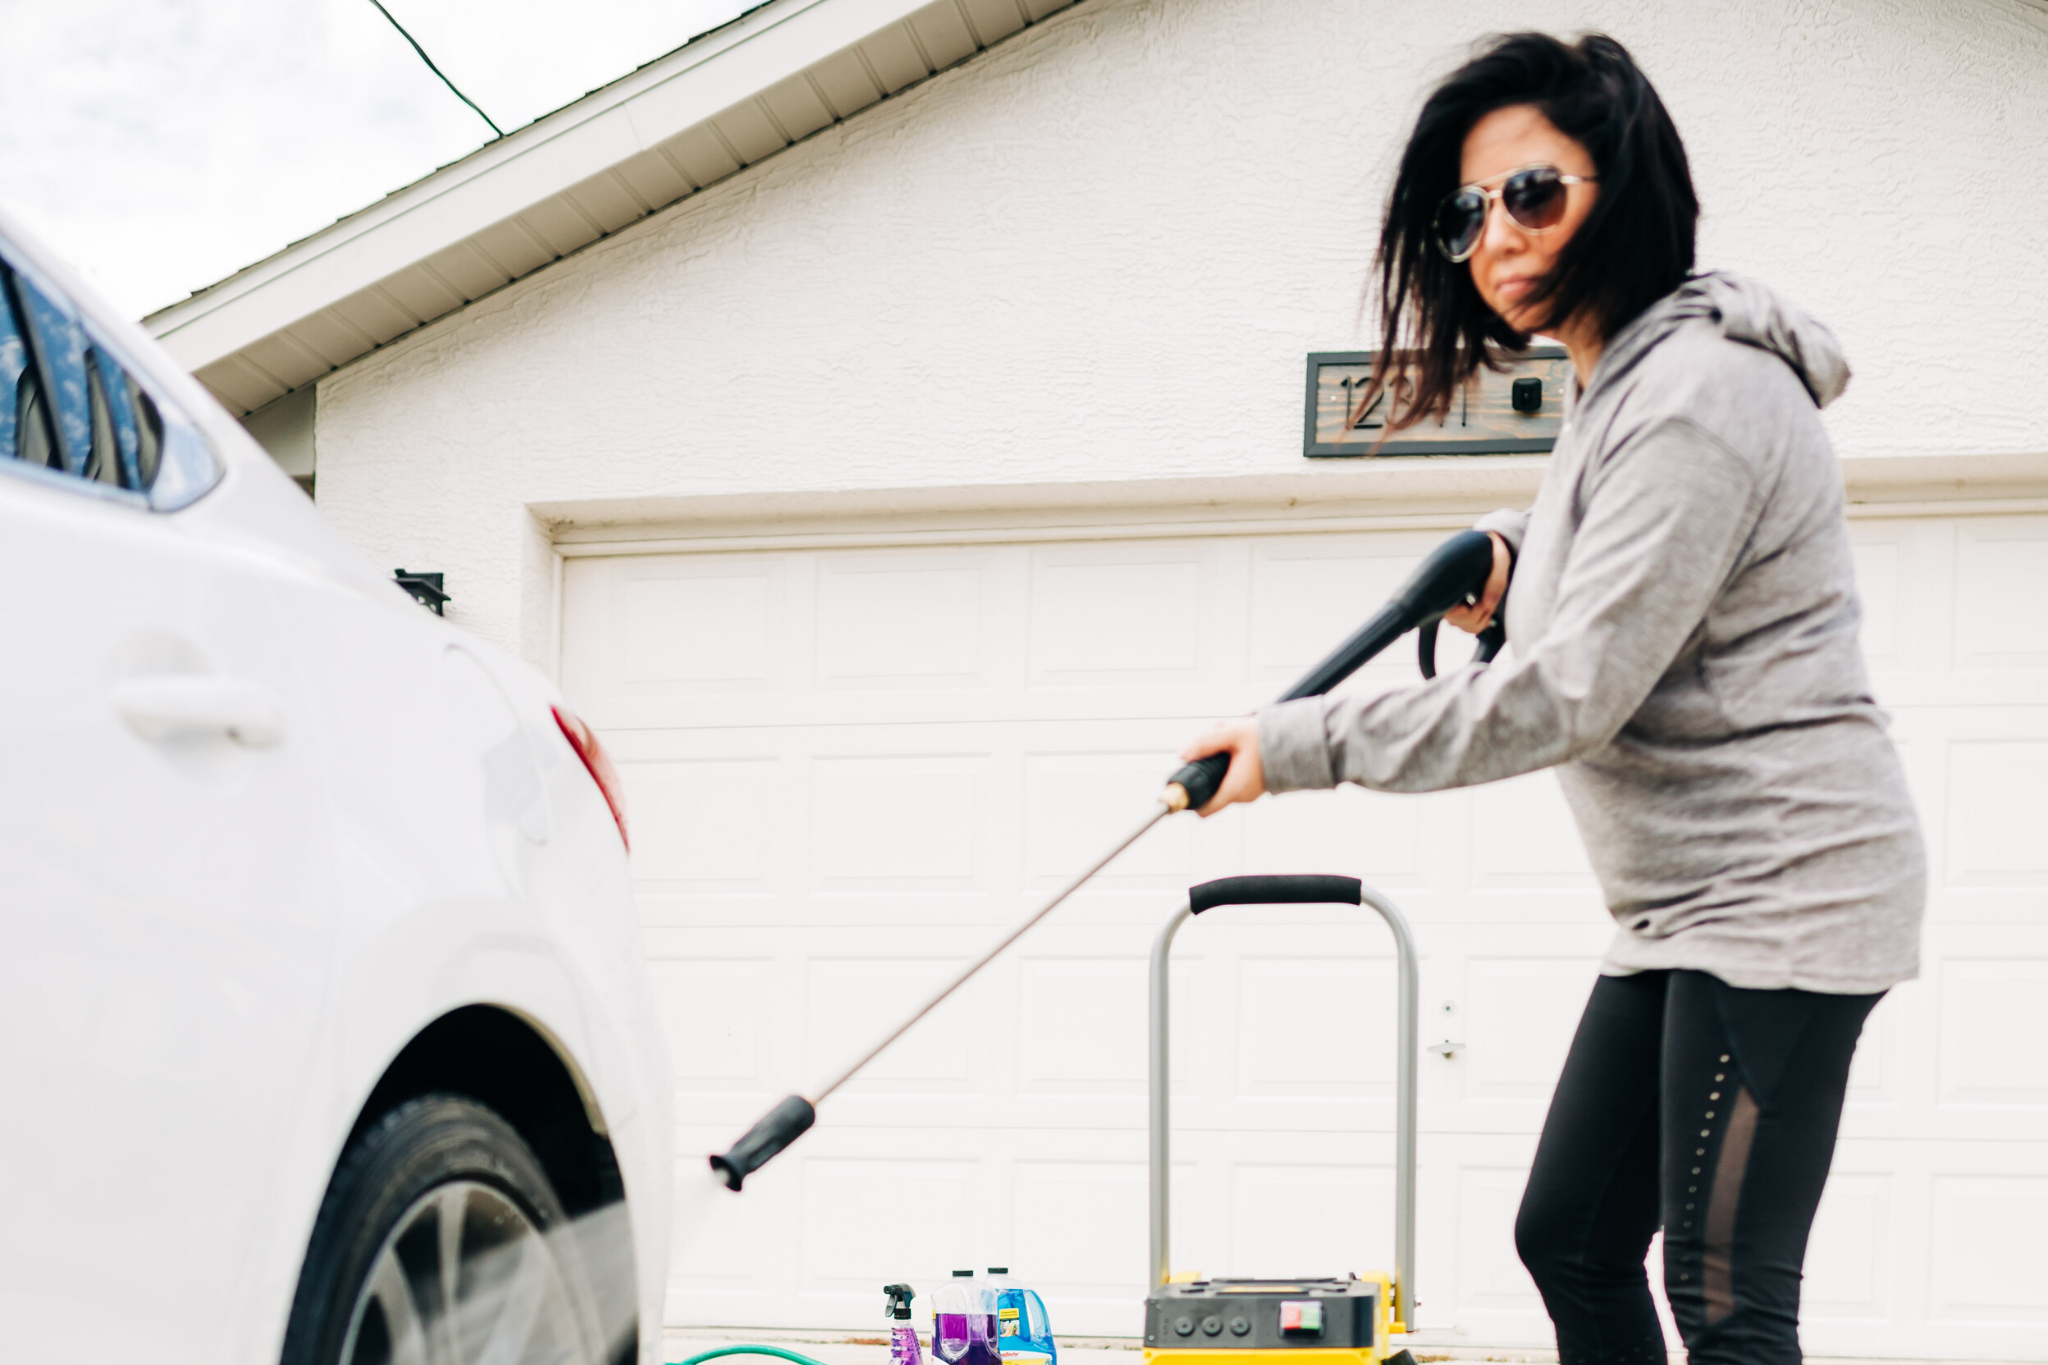 #ad #DriveForward #LifeInDrive #Autotrader @autotrader 6 simple spring car care tips to keep your vehicle running smoothly